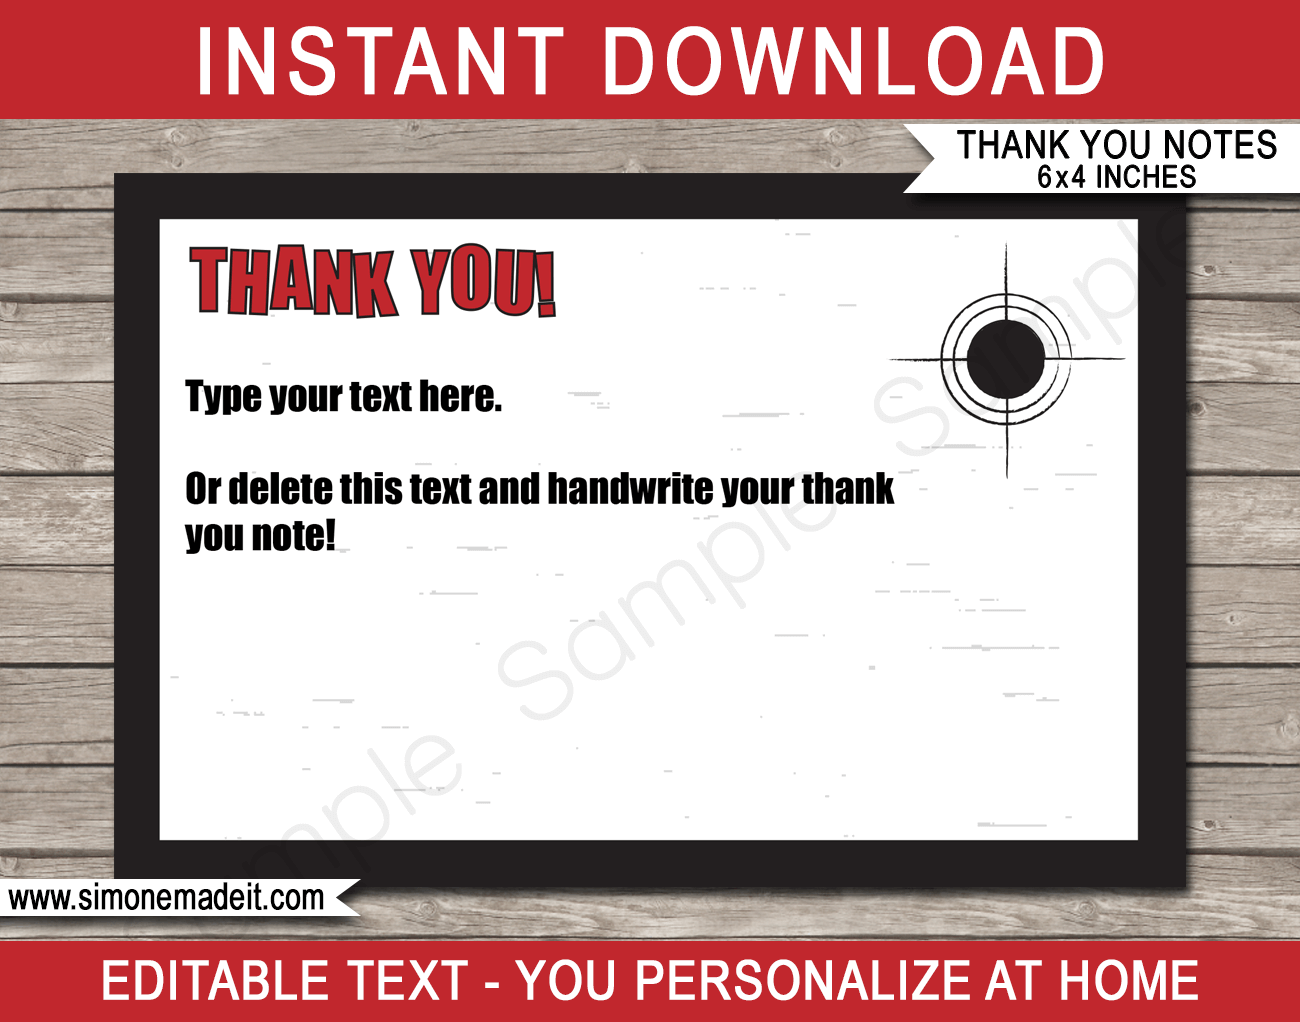 Printable Laser Tag Party Thank You Cards Template - Birthday Party theme - Editable Text - Instant Download via simonemadeit.com